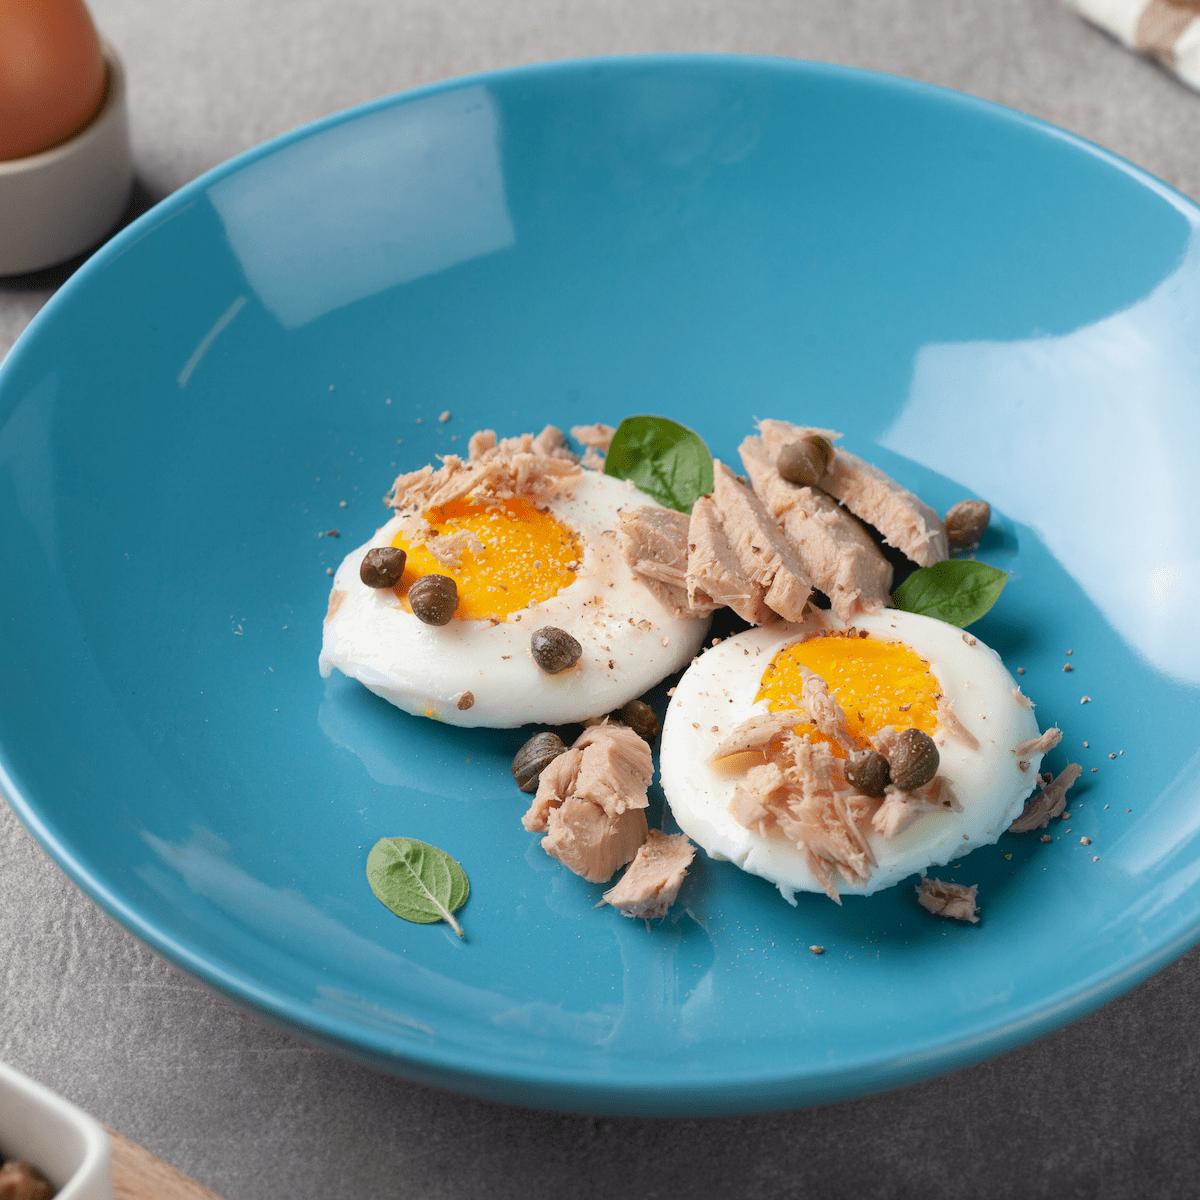 Boiled eggs with tuna and capers